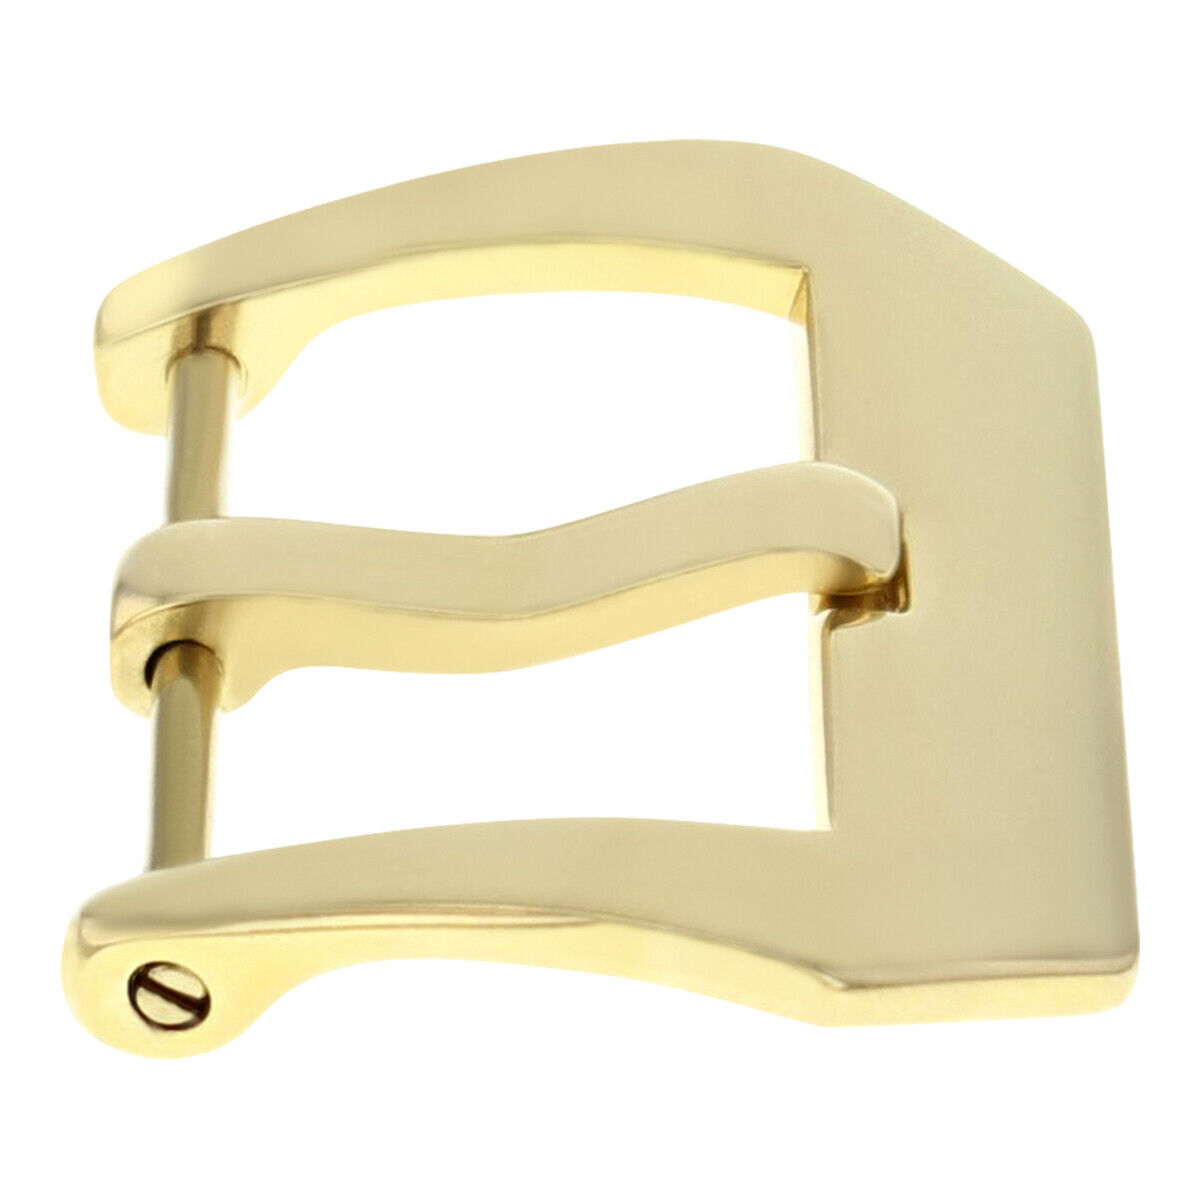 20MM STRAP PRE-V SCREW BUCKLE FOR PAM 40MM PANERAI MARINA LUMINOR GMT  IPG GOLD